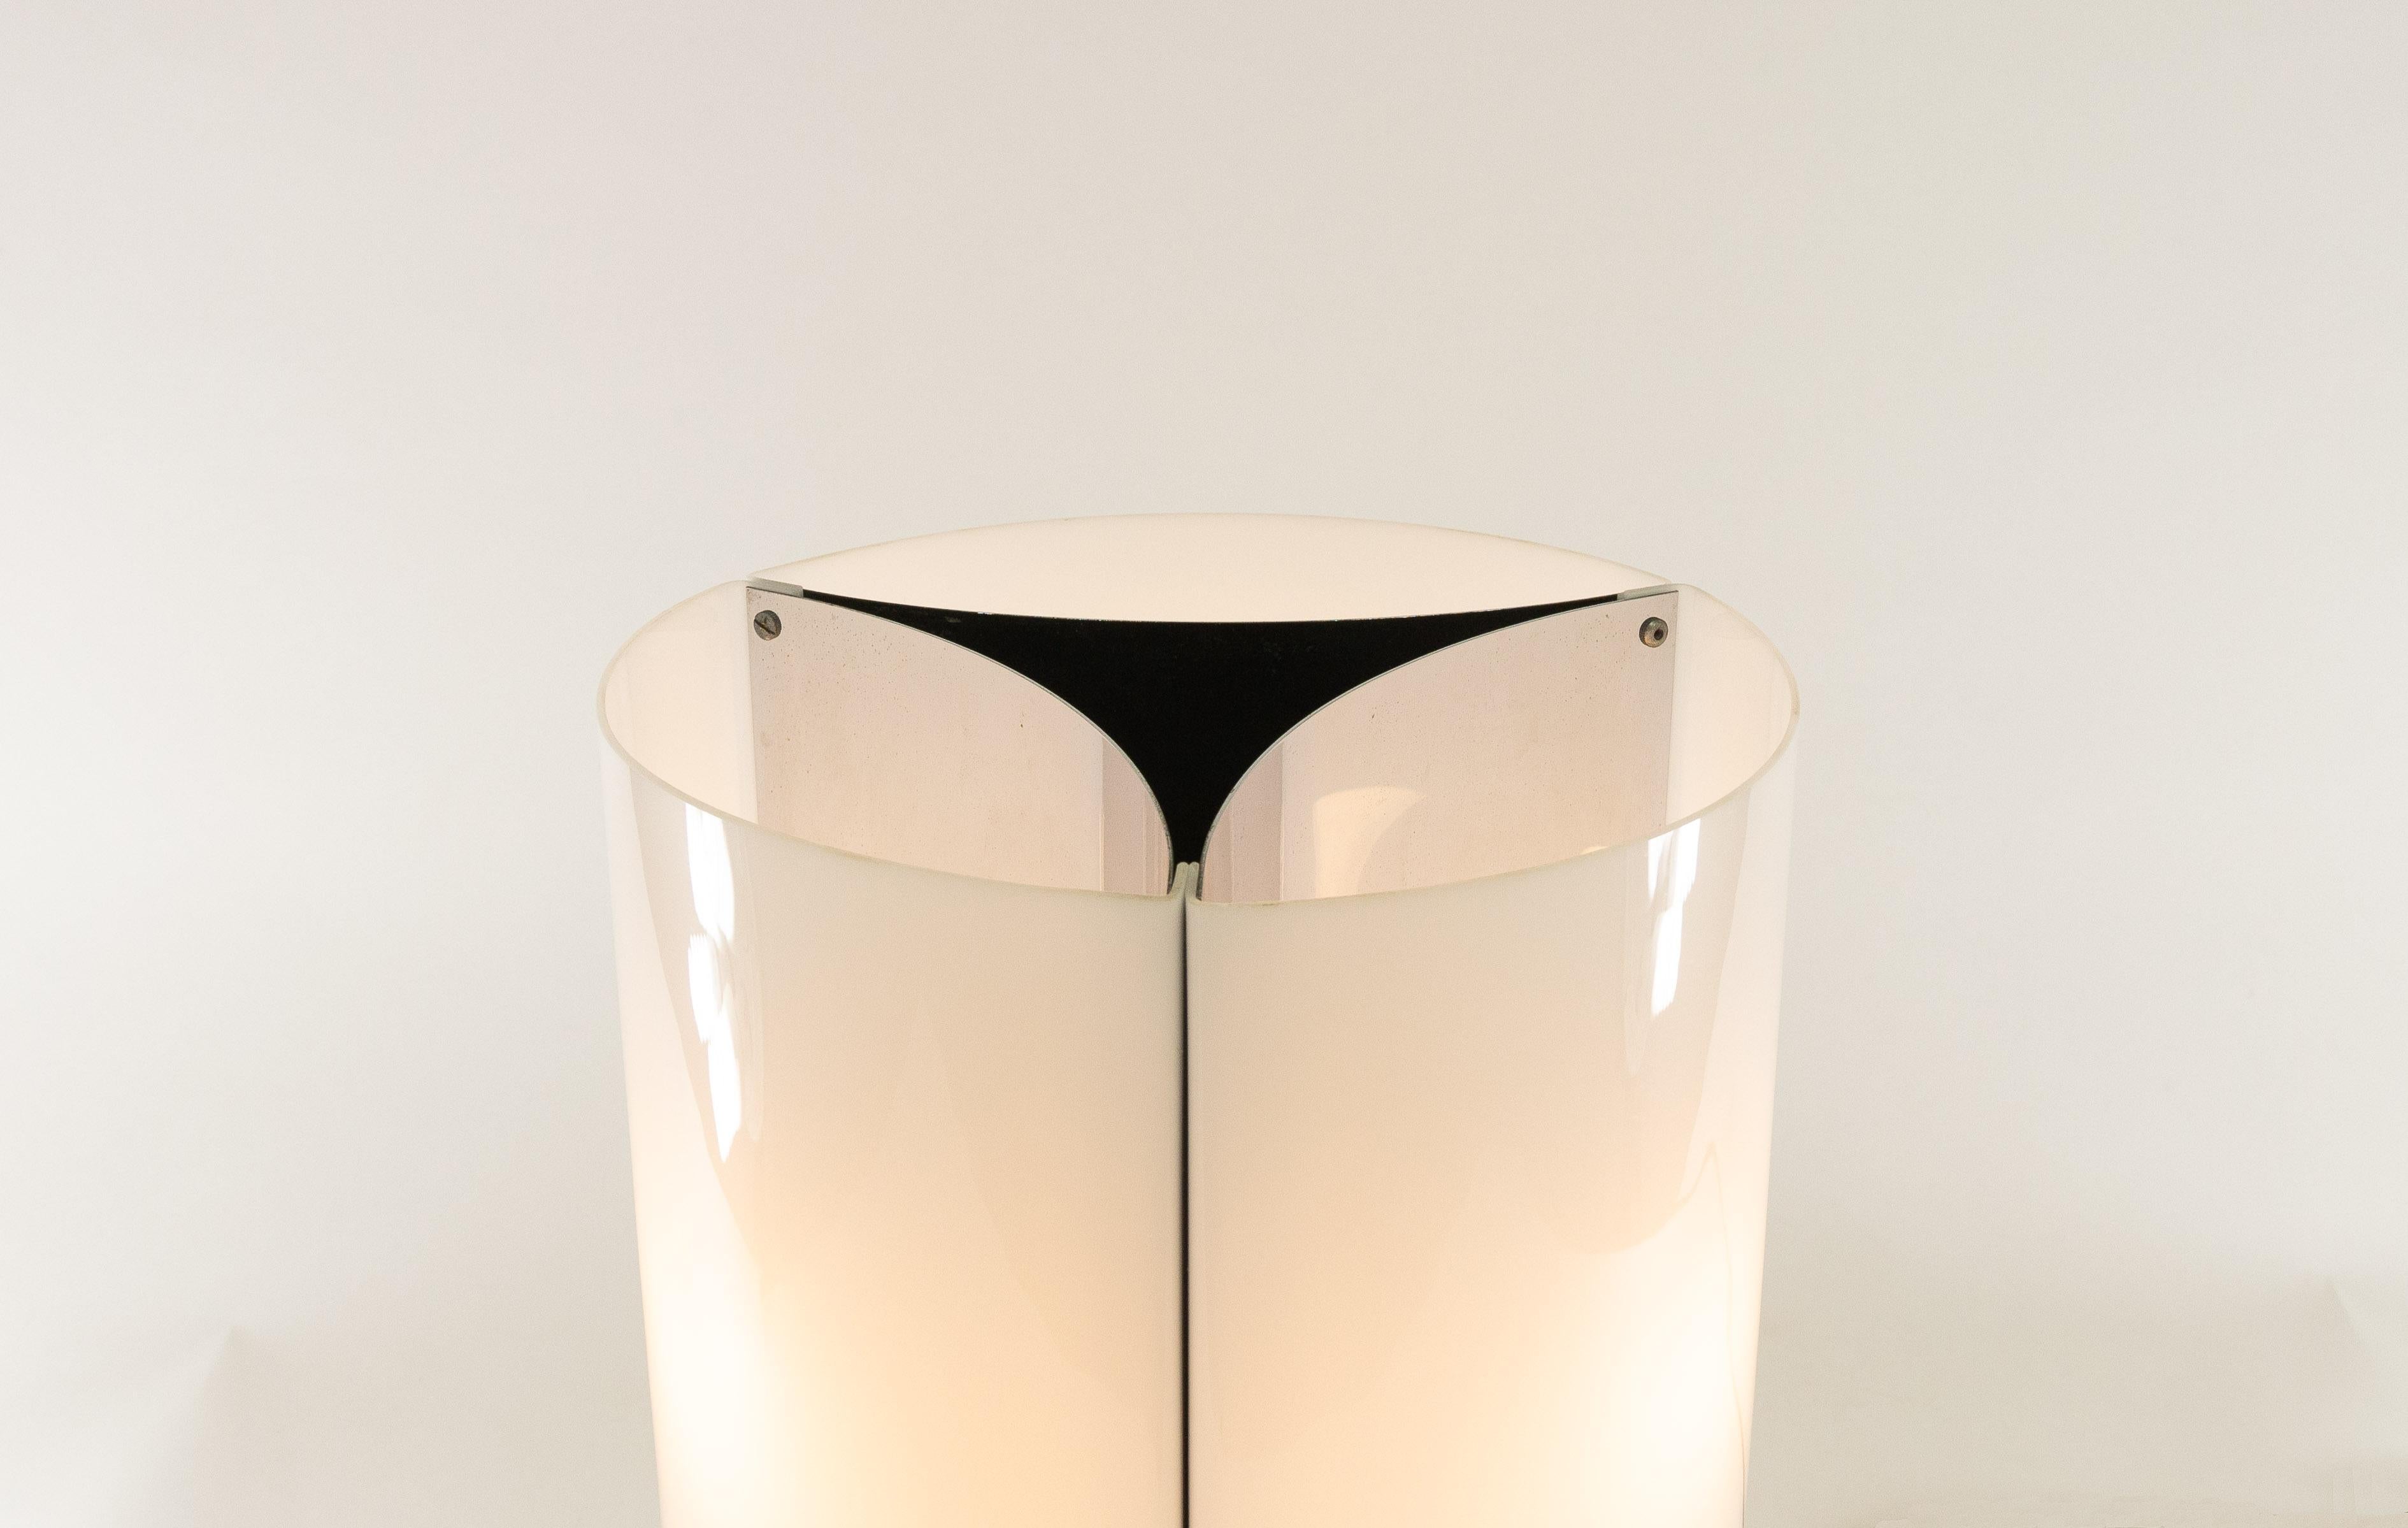 Mid-Century Modern Table Lamp Model No. 526/P by Massimo Vignelli for Arteluce, 1965